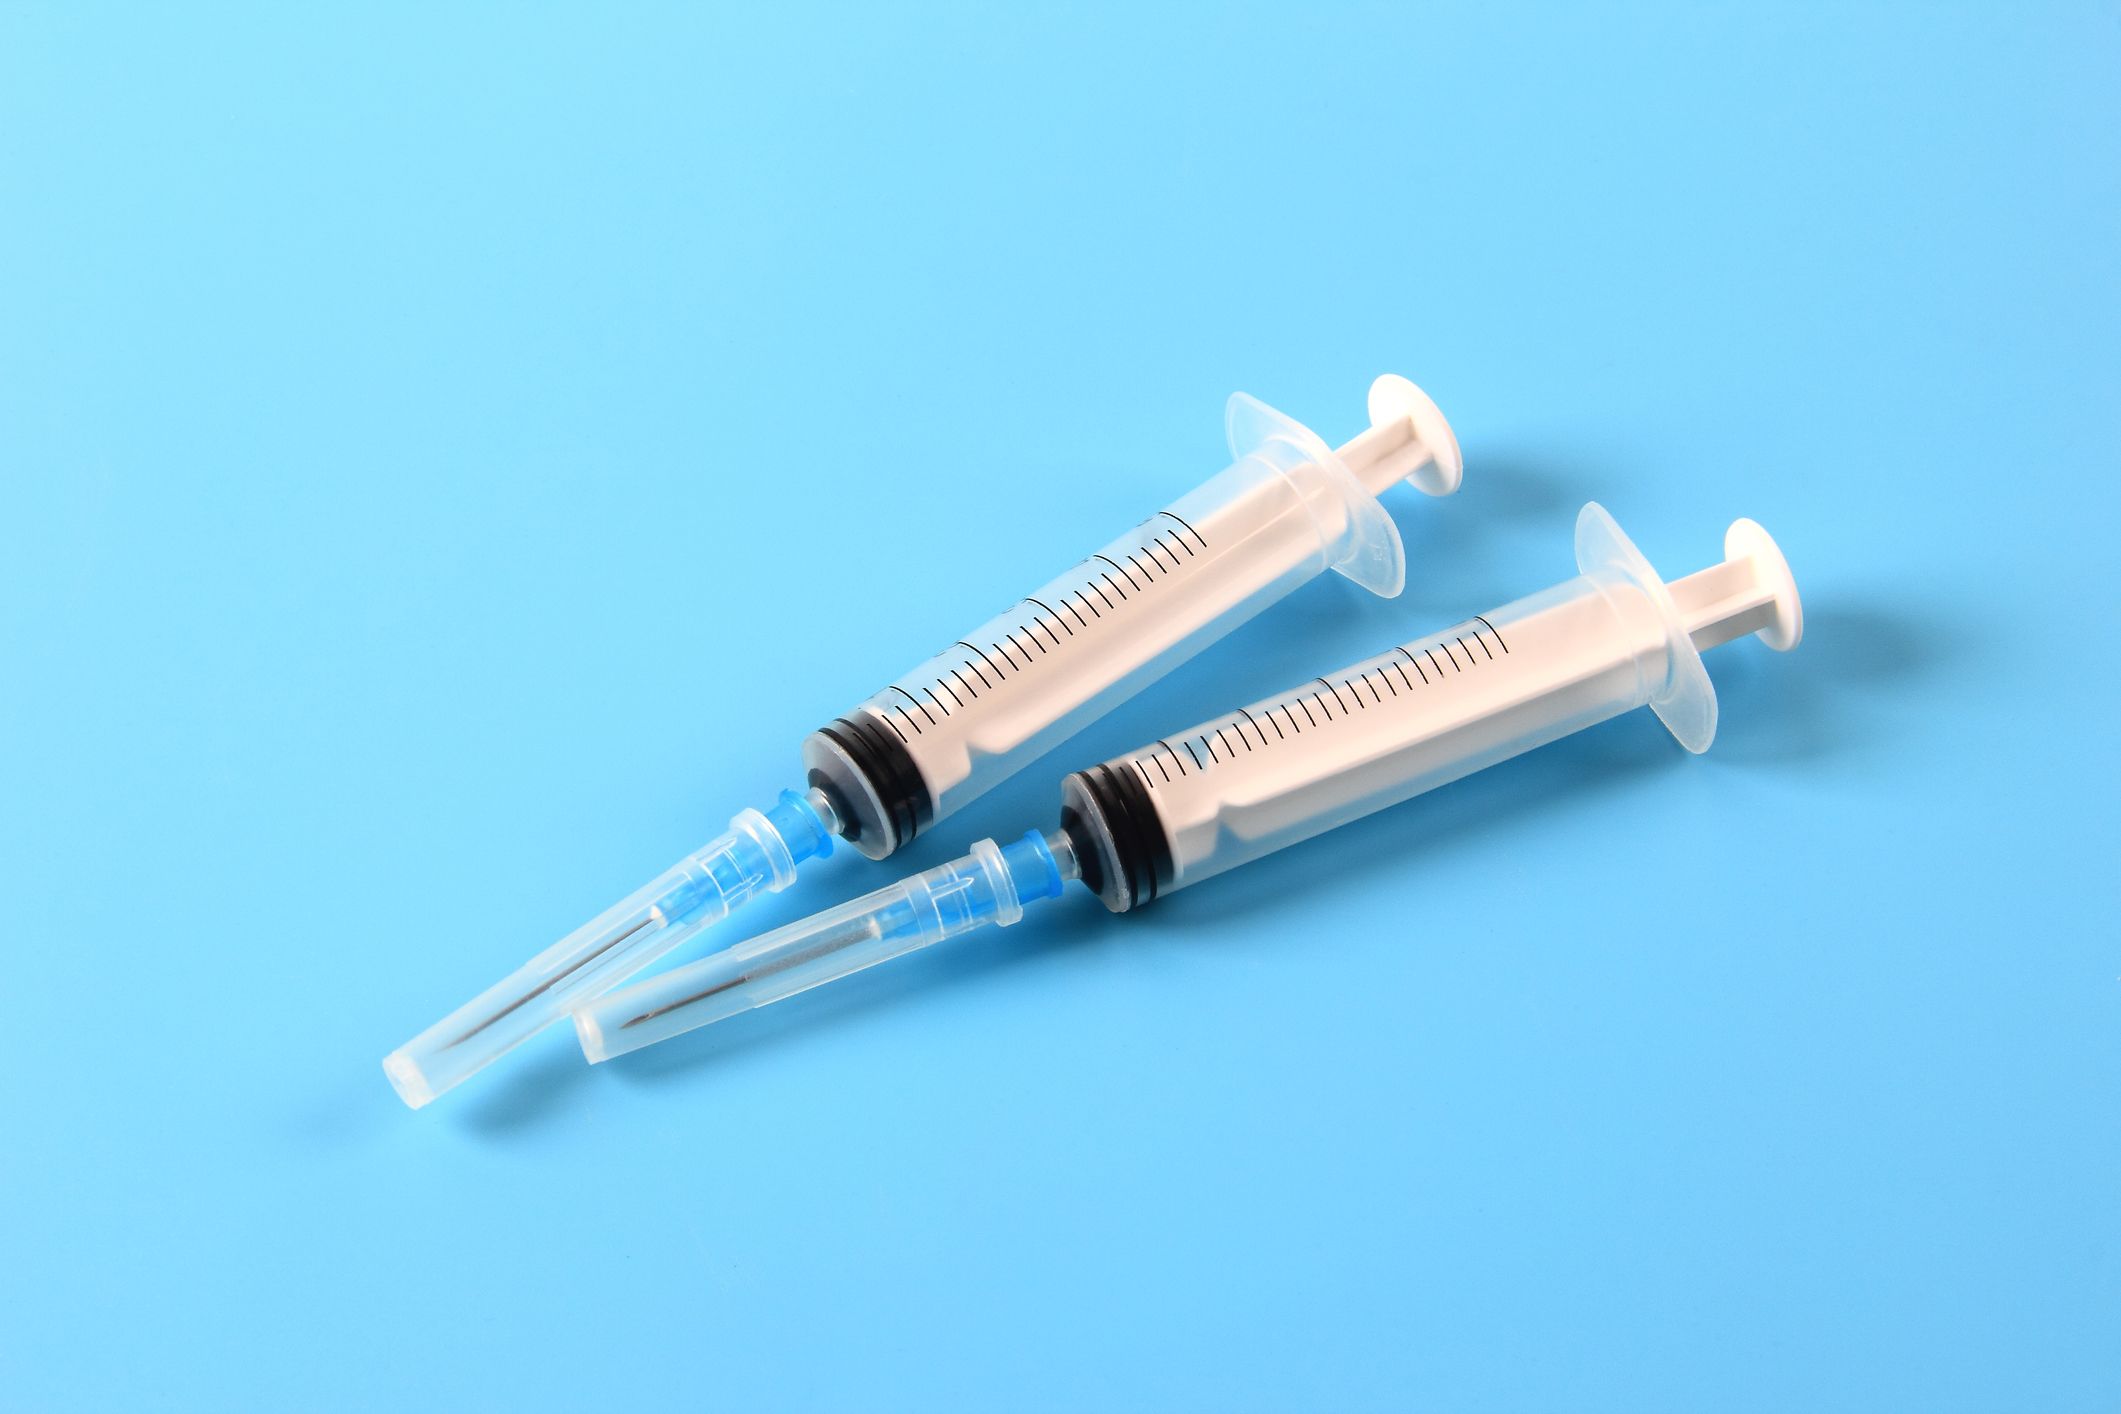 Tips on Getting Your Second Shingles Vaccine Dose